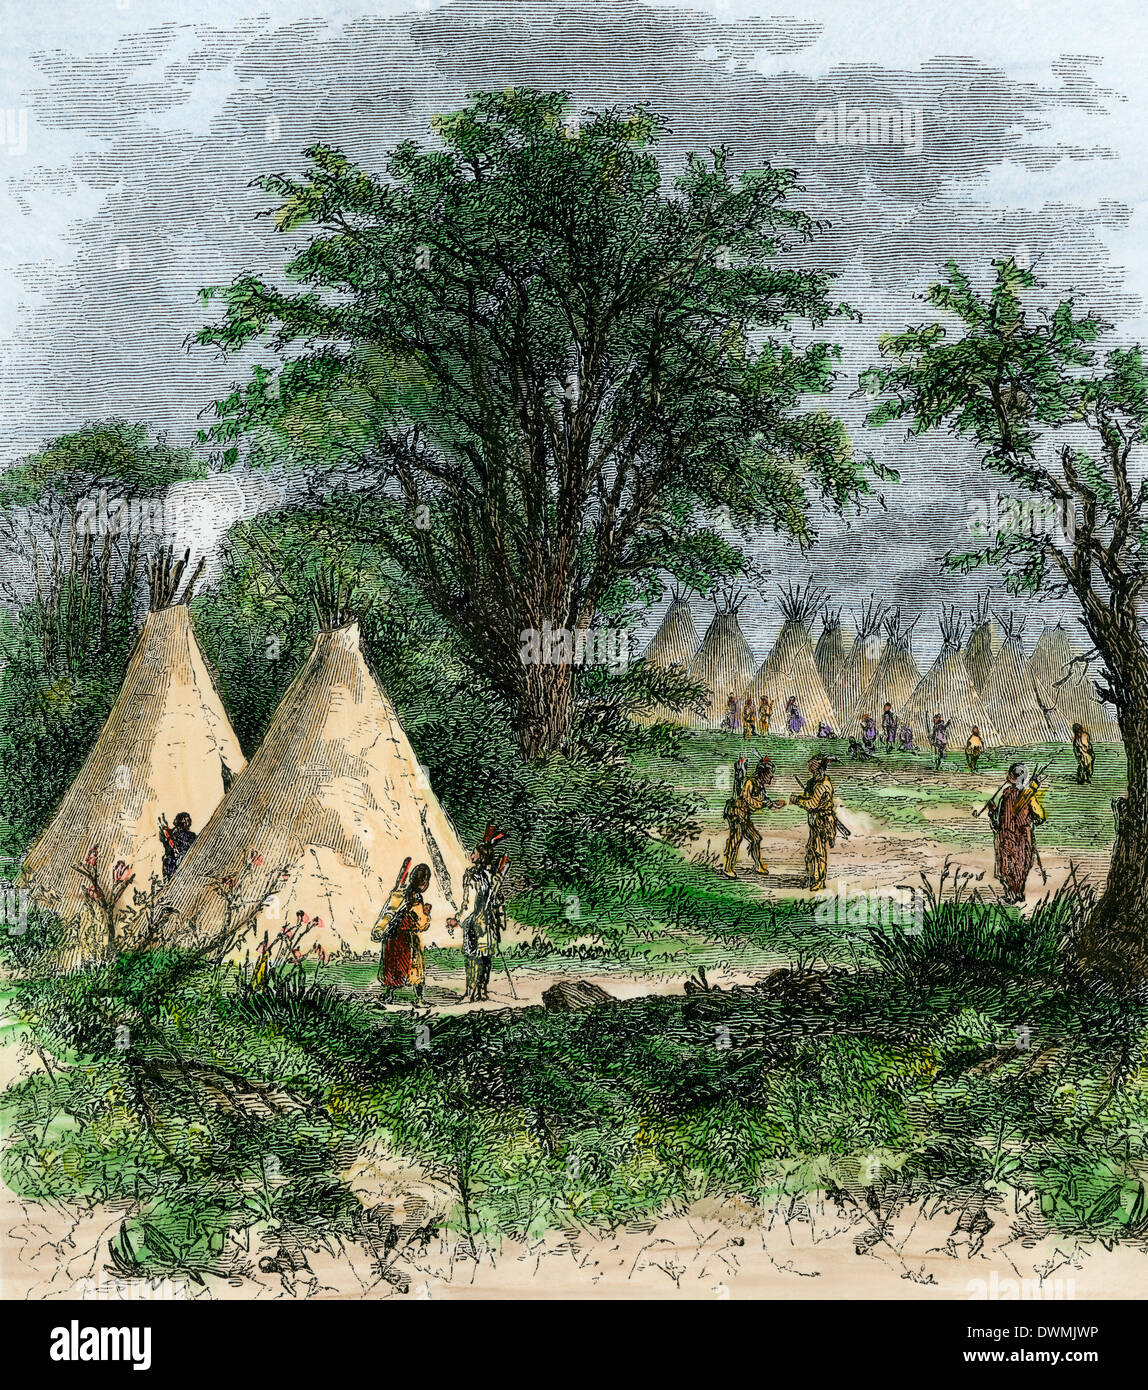 Native American tipi village, 1800s. Hand-colored woodcut Stock Photo